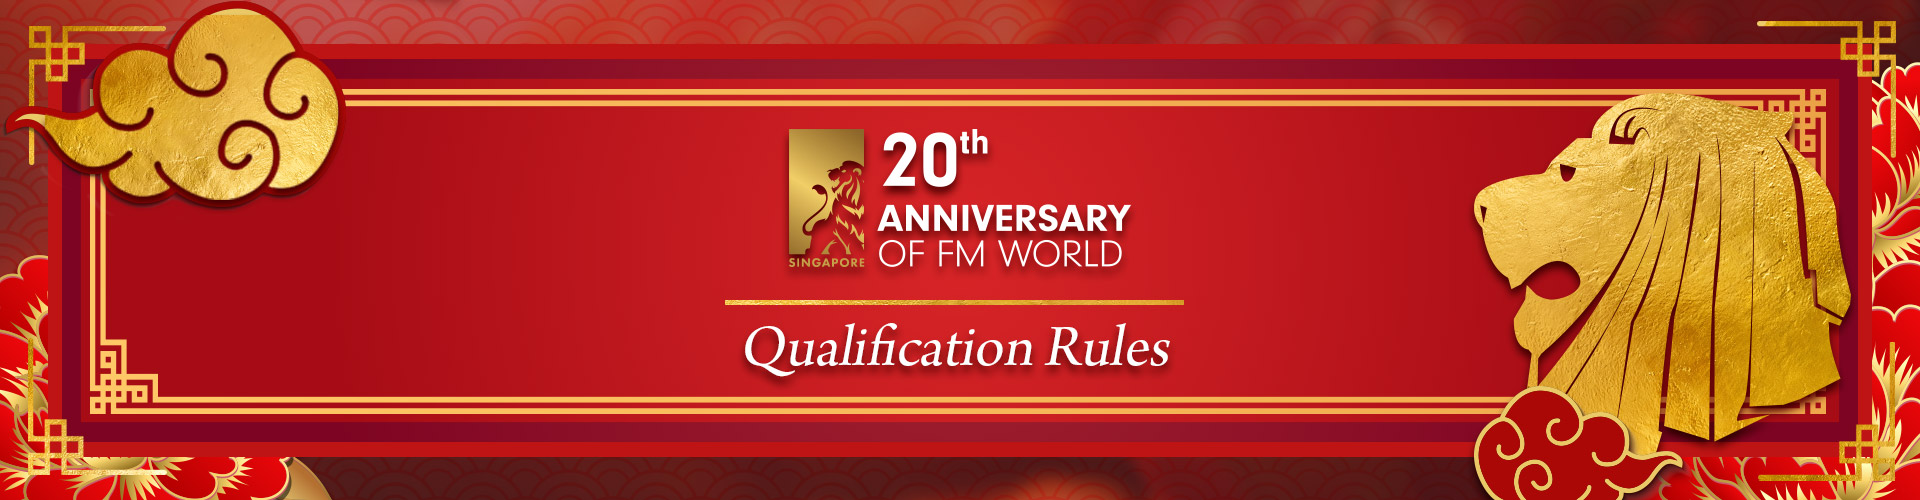 QUALIFICATION RULES OF 20TH ANNIVERSARY